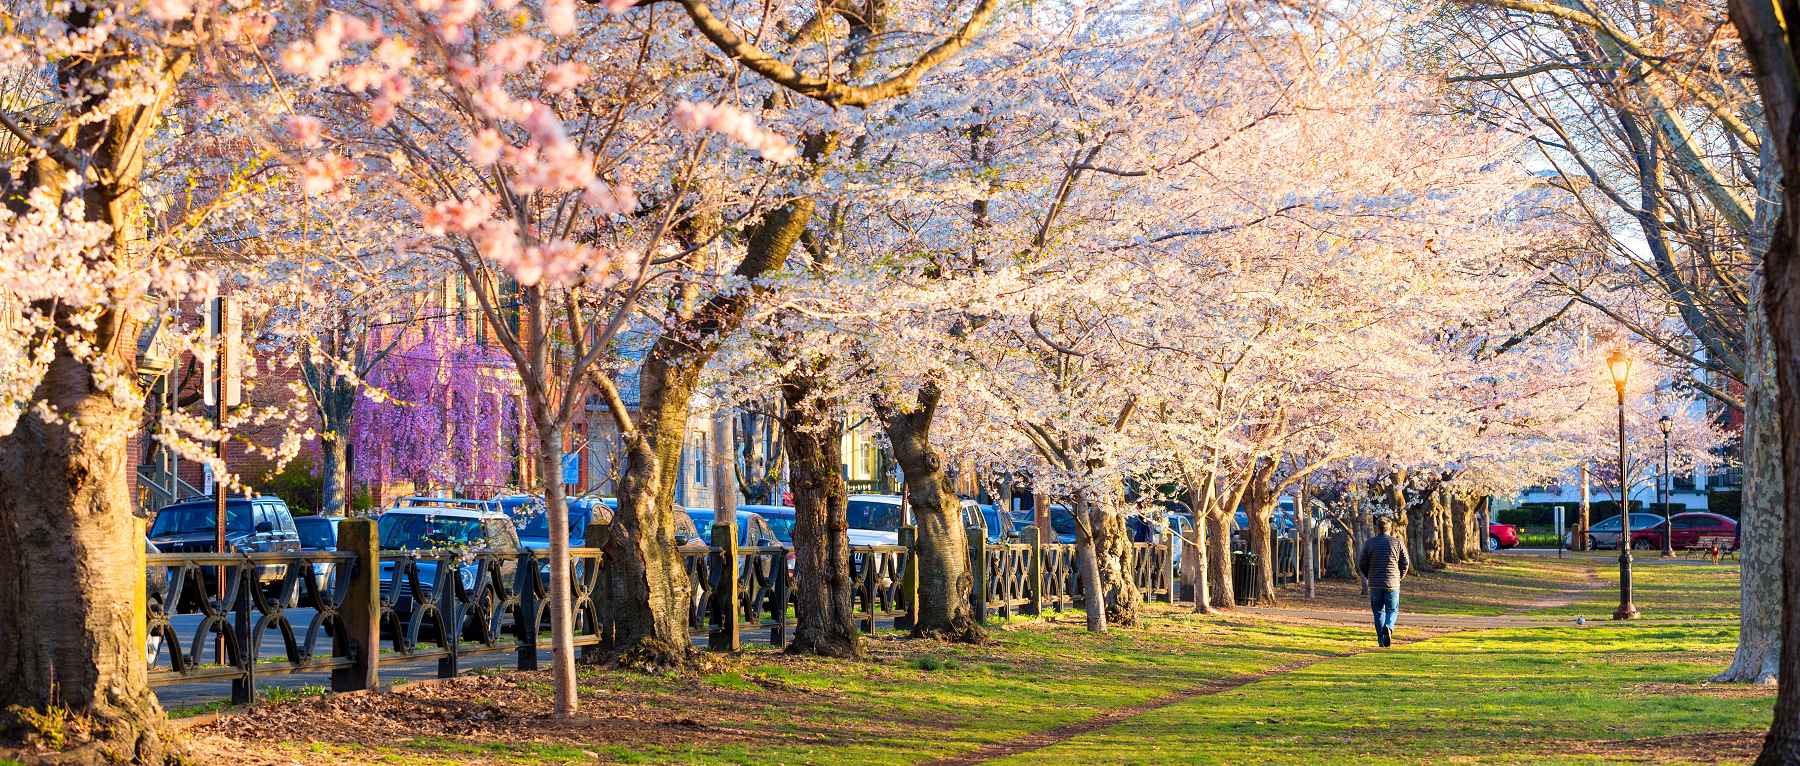 Cherry Blossoms at Wooster Square Park in New Haven, CT